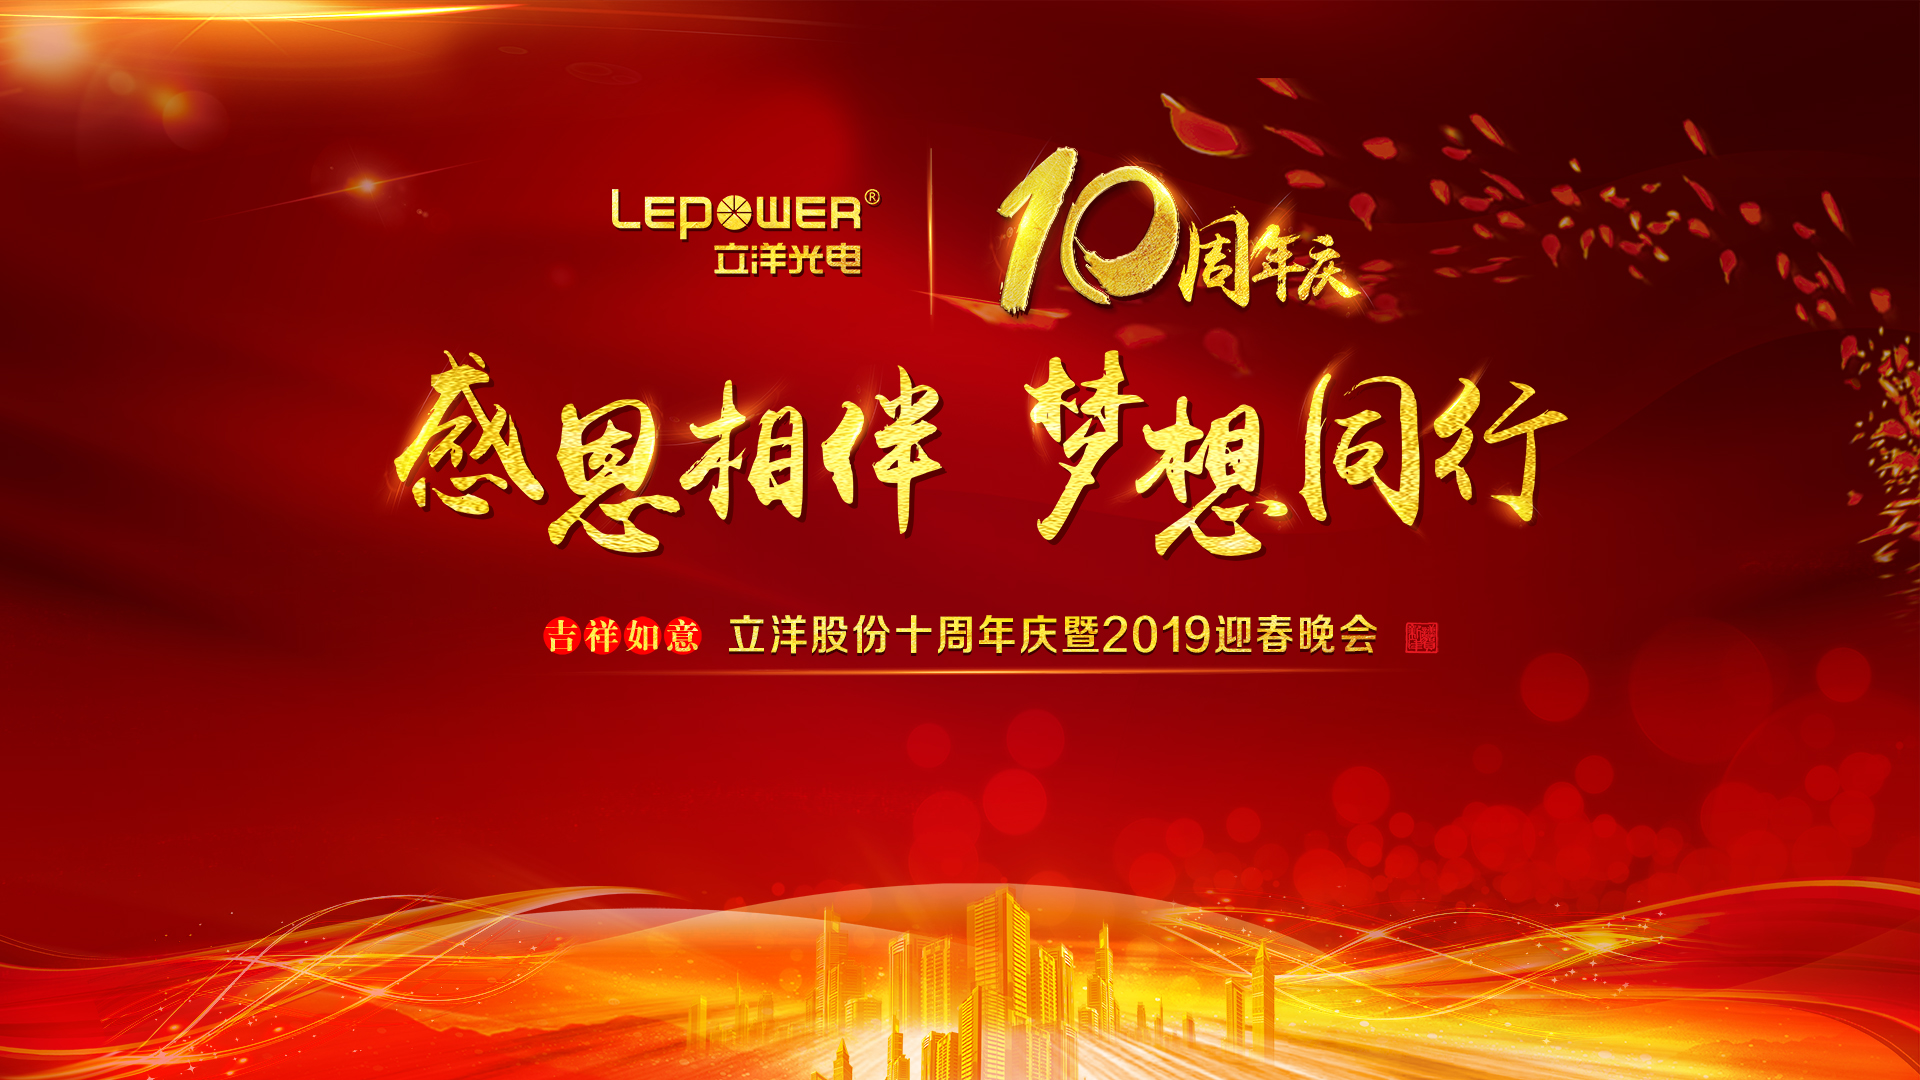 Thank you for accompanying us with dreams -Lepower Shares 10th anniversary celebration and 2019 Spring Gala came to a successful end